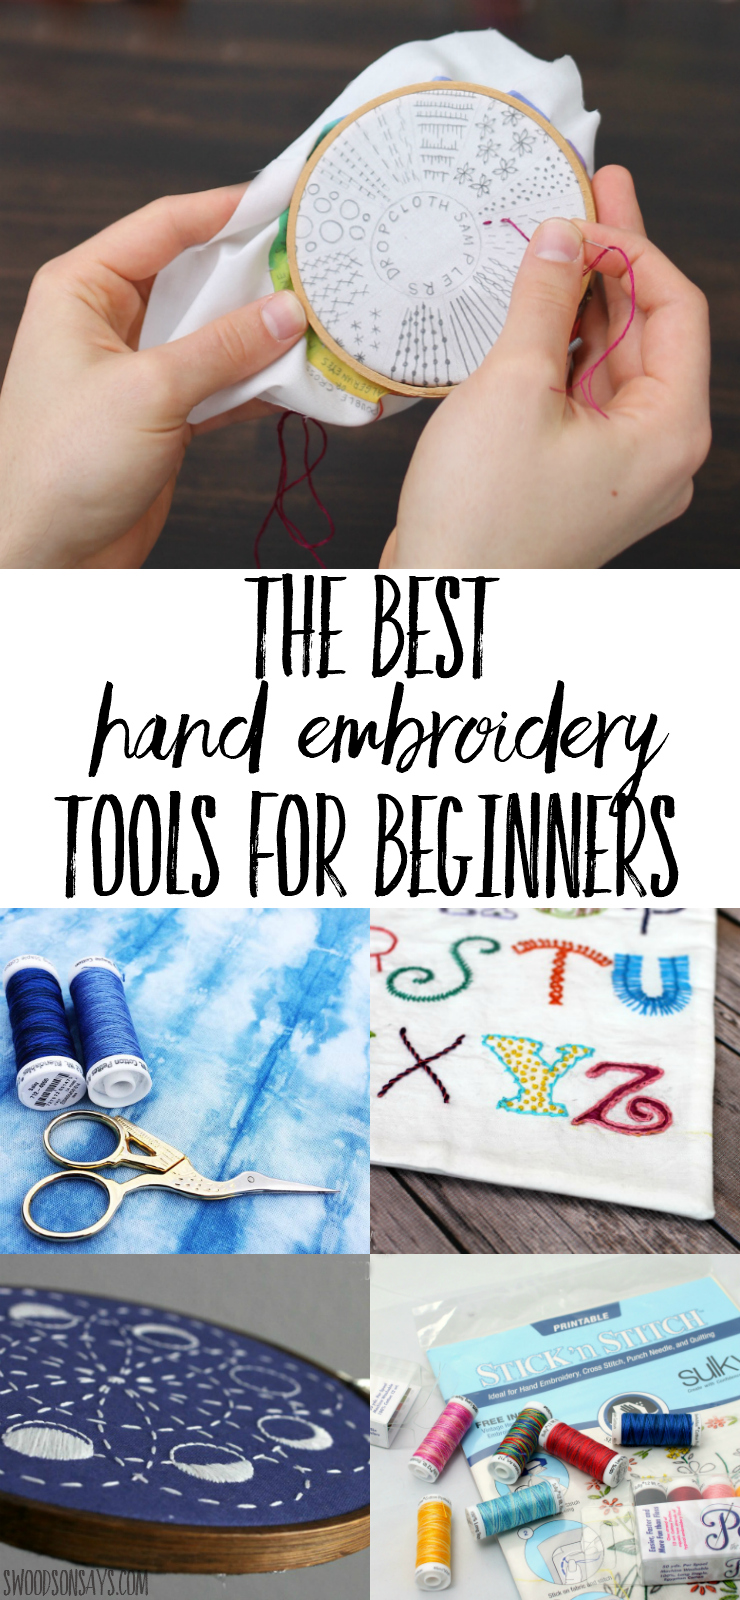 Overwhelmed with what to buy when learning how to embroider? Check out this list of best hand embroidery tools! What you need vs. what's nice to have, this list will have you ready to start embroidering! #embroidery #handsewing